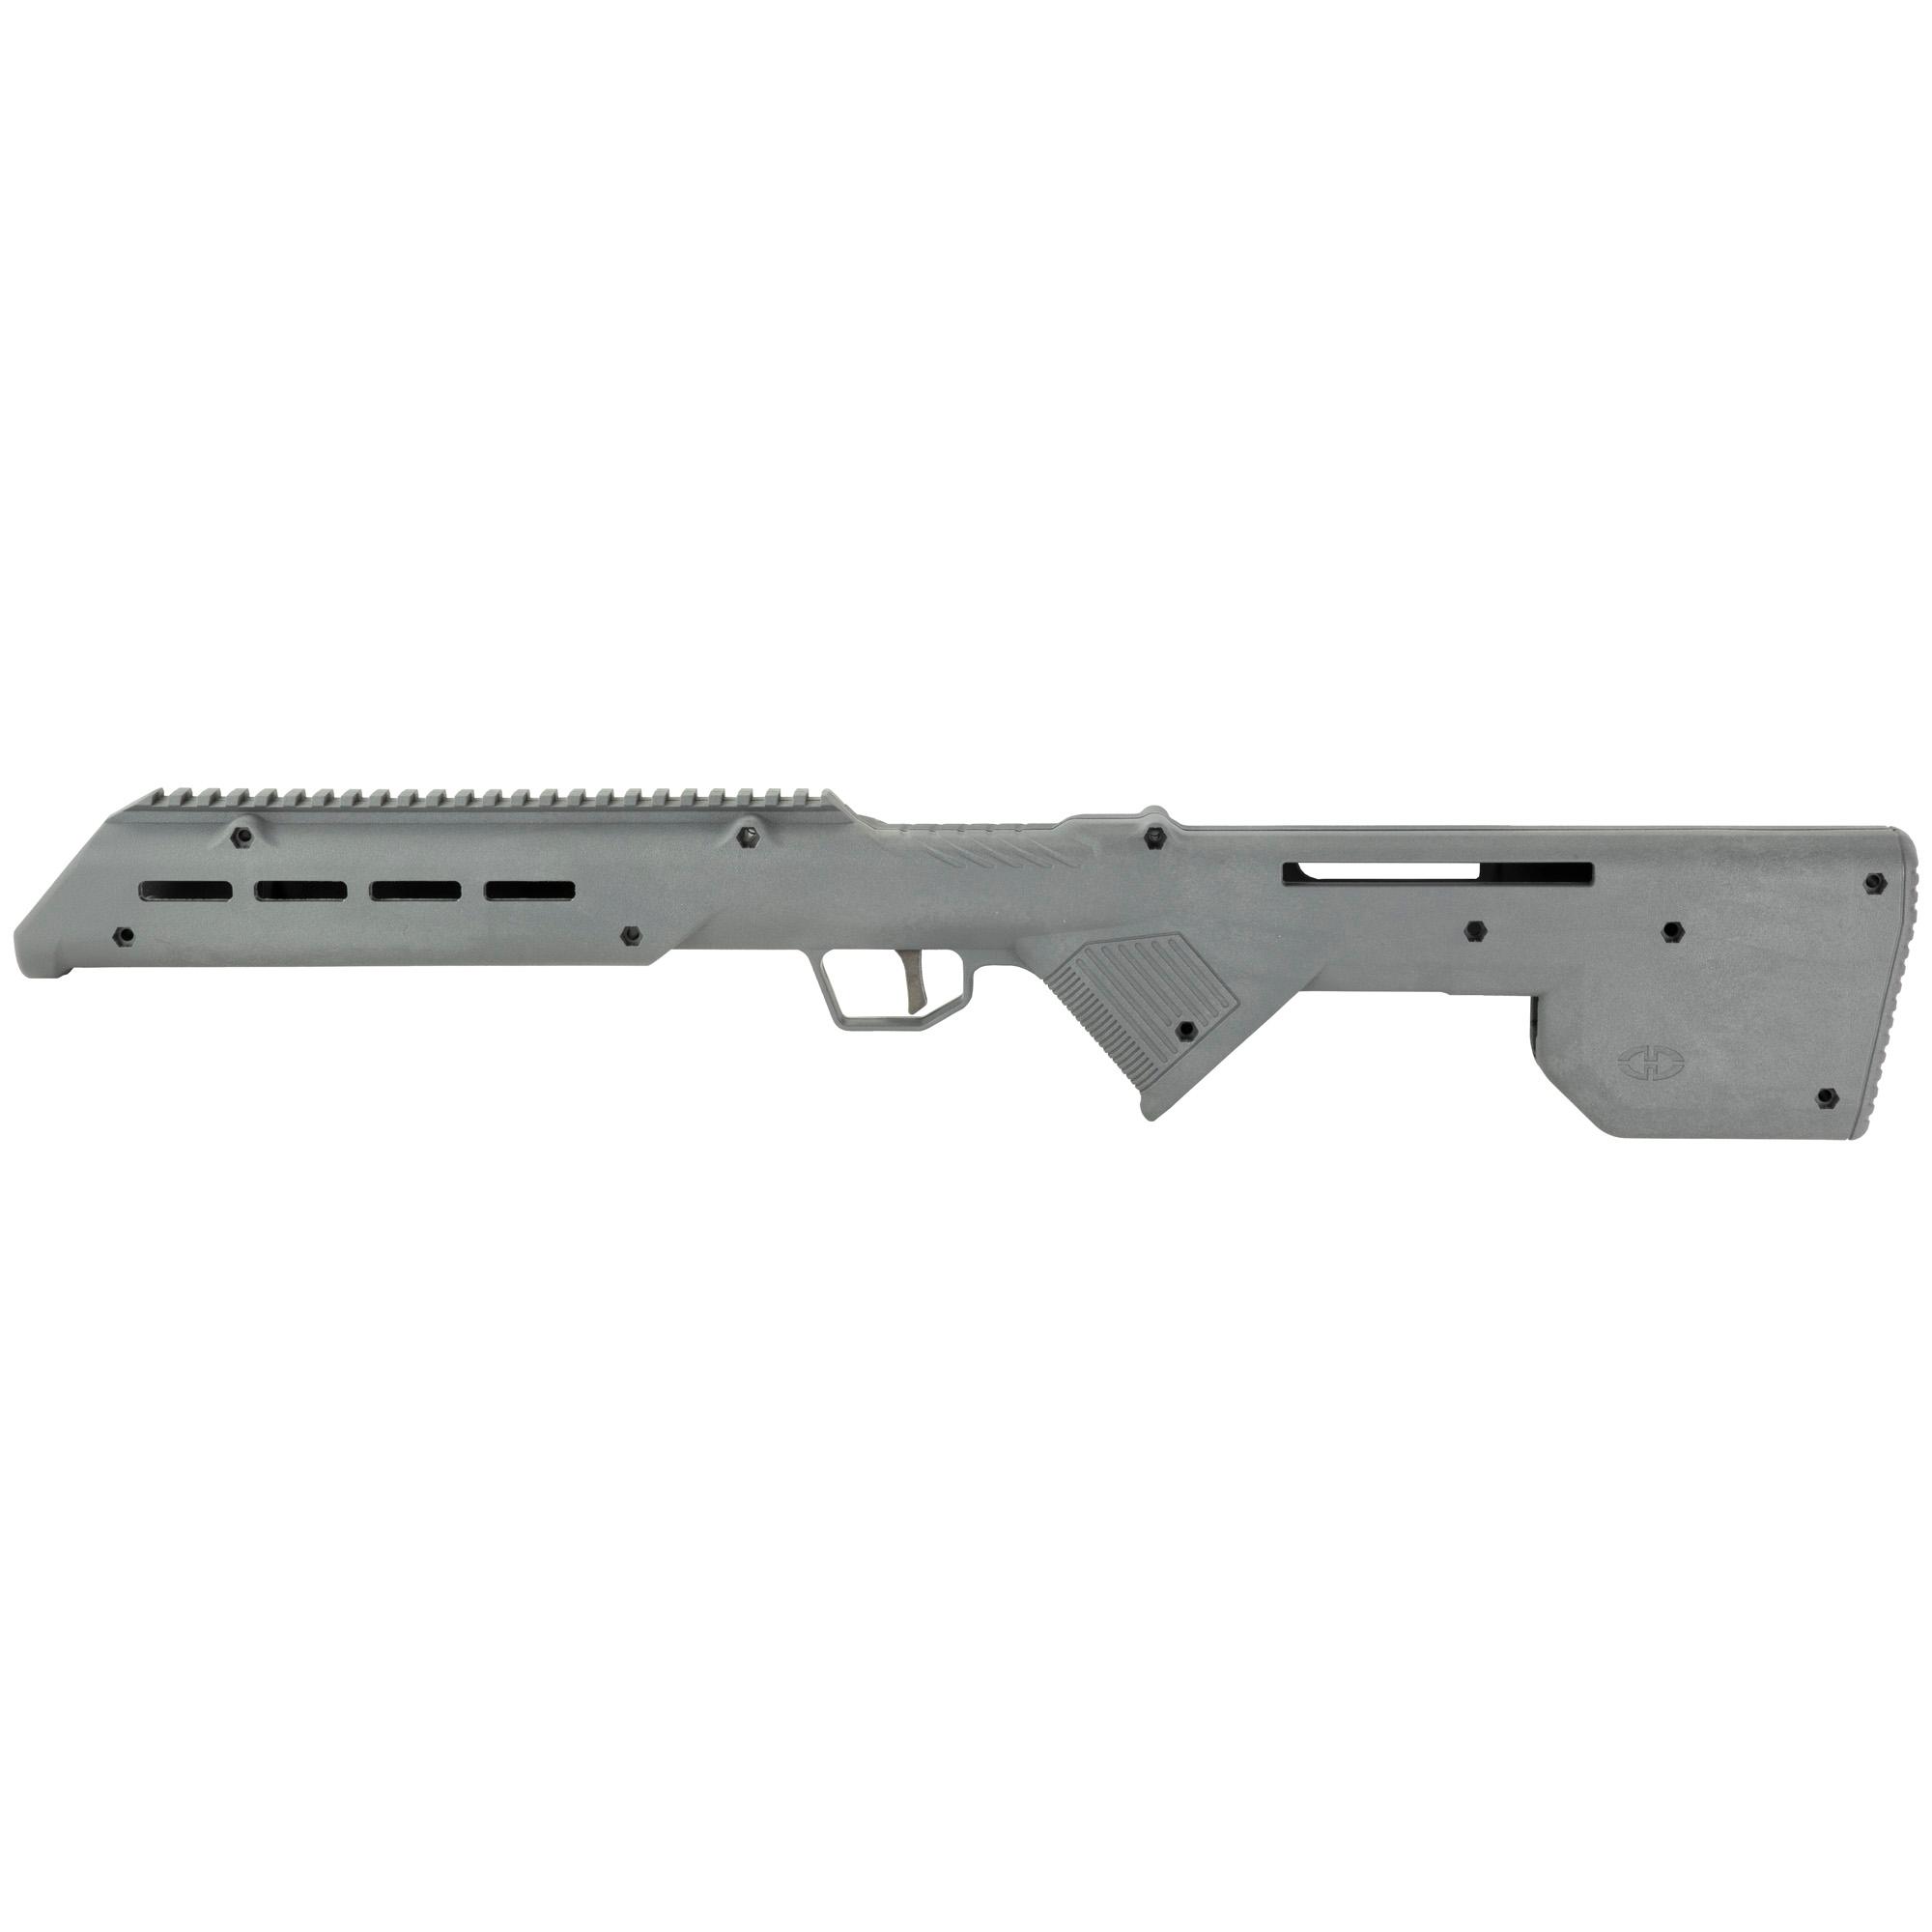 Gun Cleaning DT TREK-22 CHASSIS STOCK KIT GRY image 1